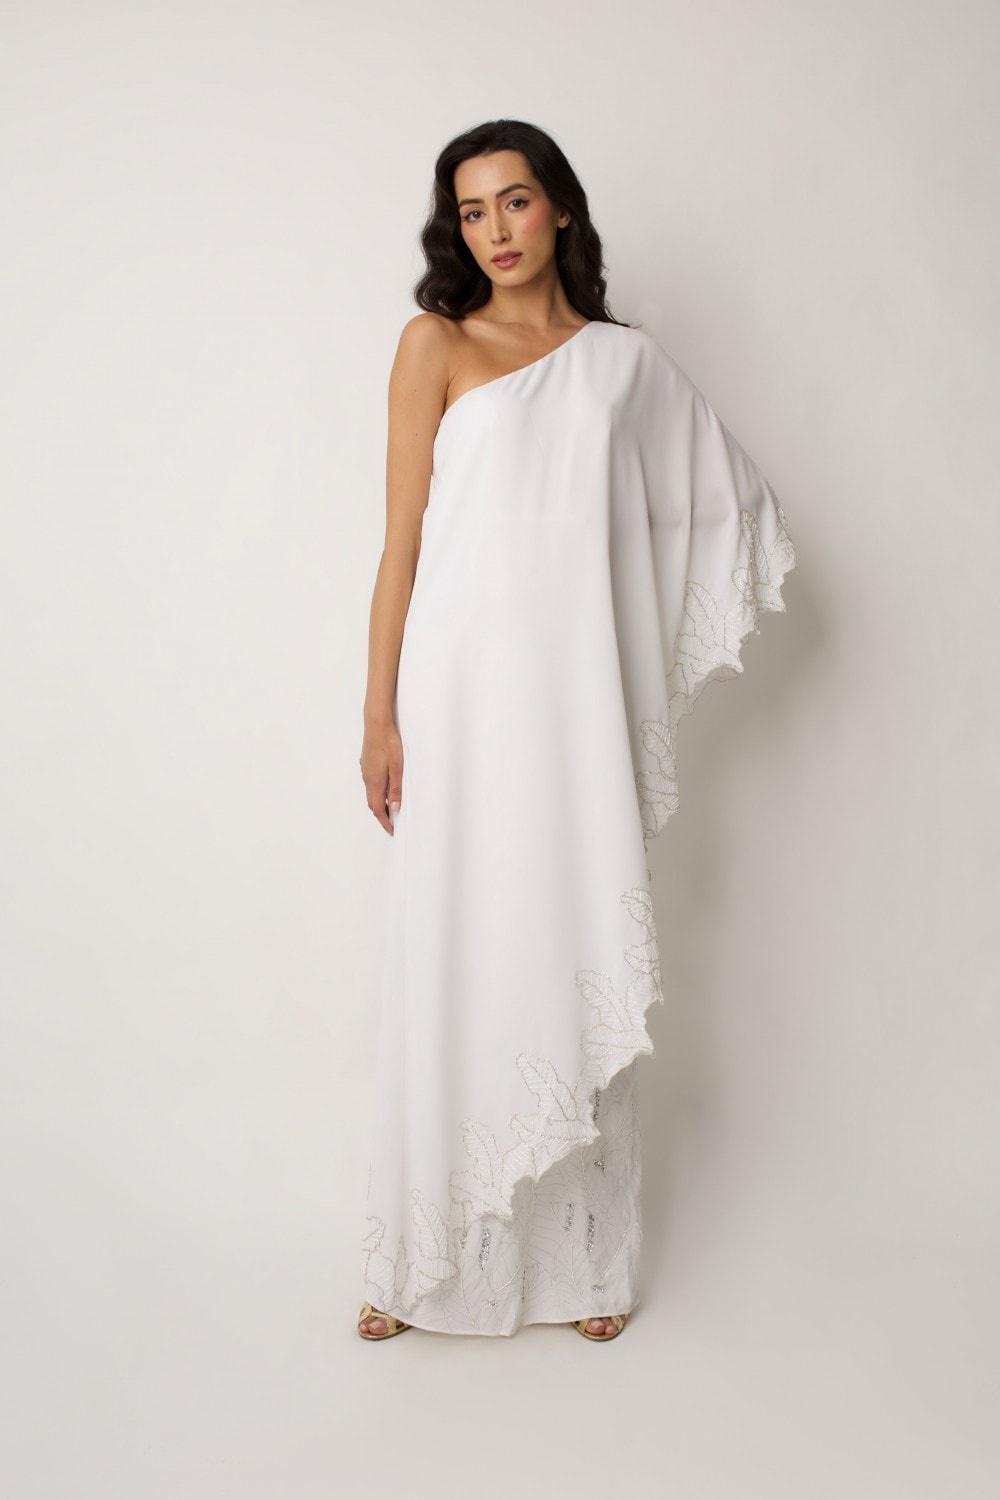 Model in a one sleeved cape wedding dress